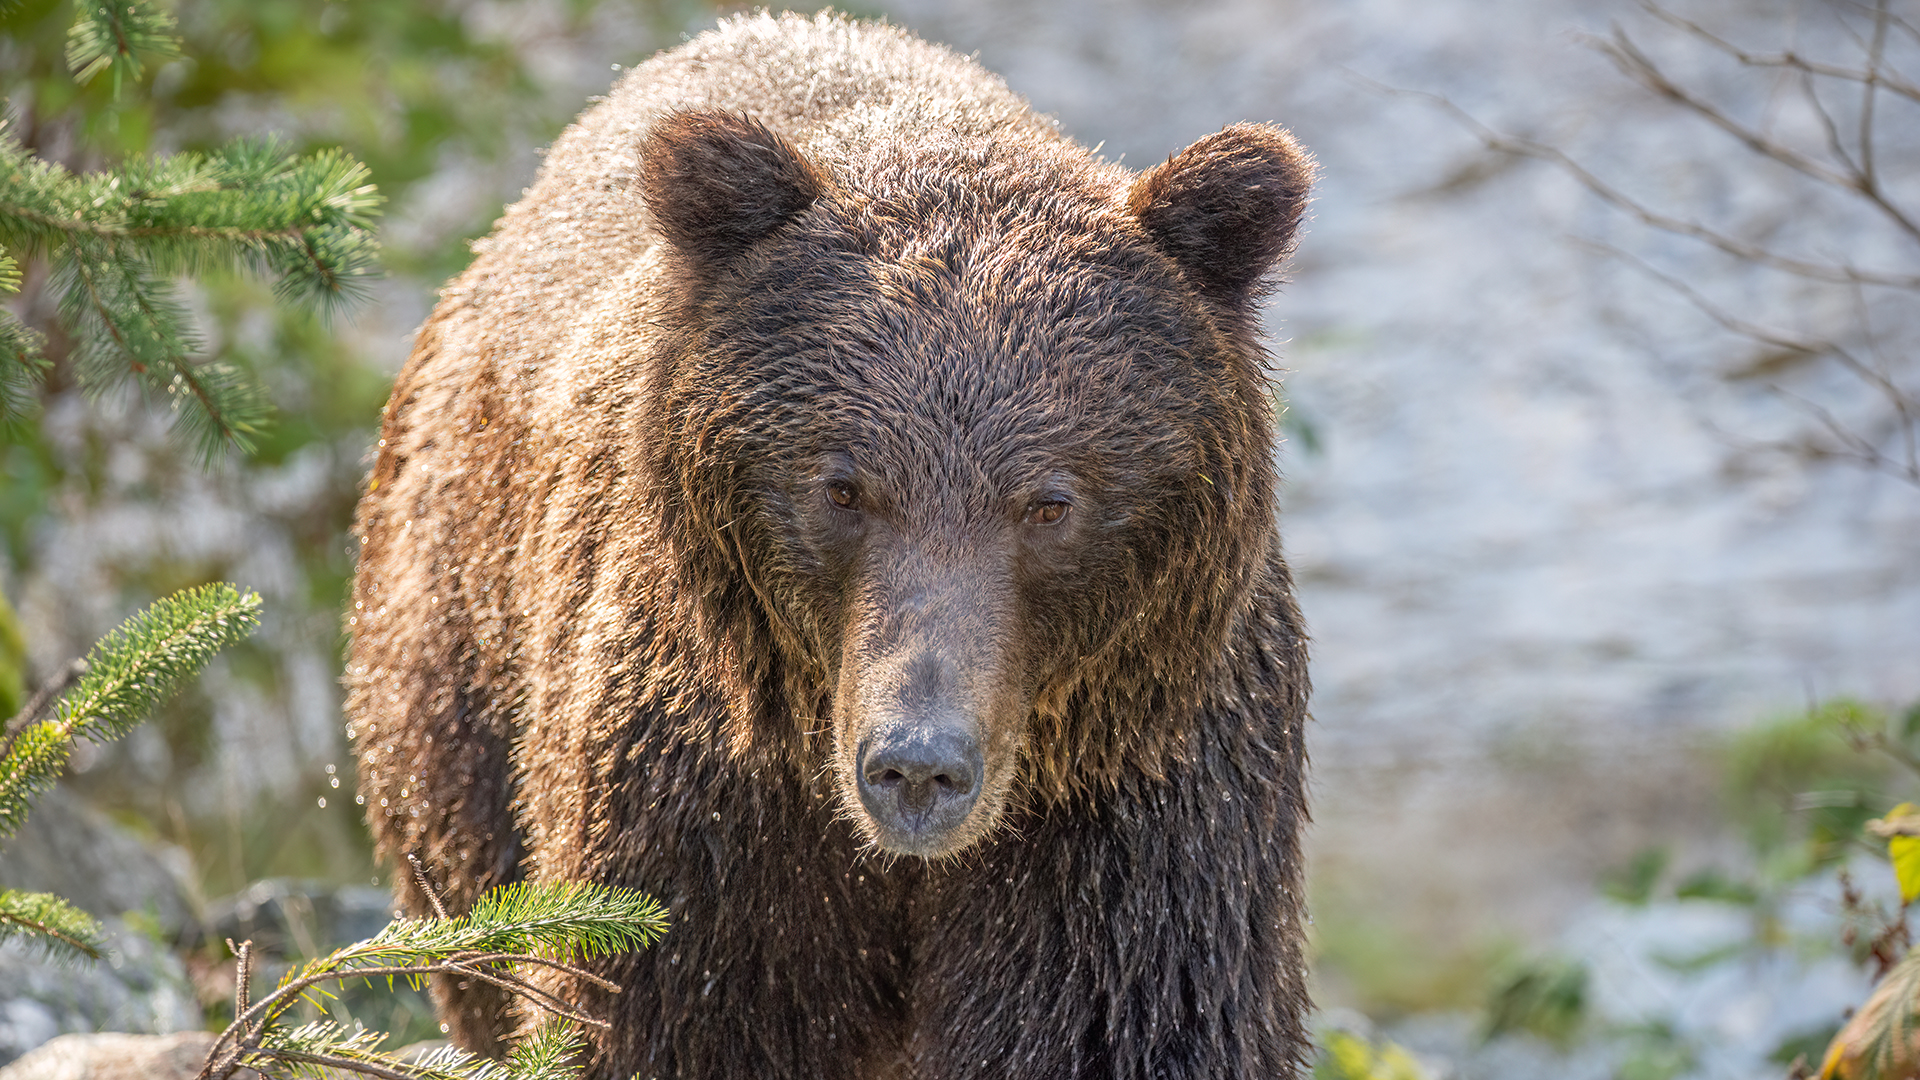 This young male brown bear’s fur takes on an almost golden hue in the sunlight. Again, observe the length of the snout—this bear has some growing to do.